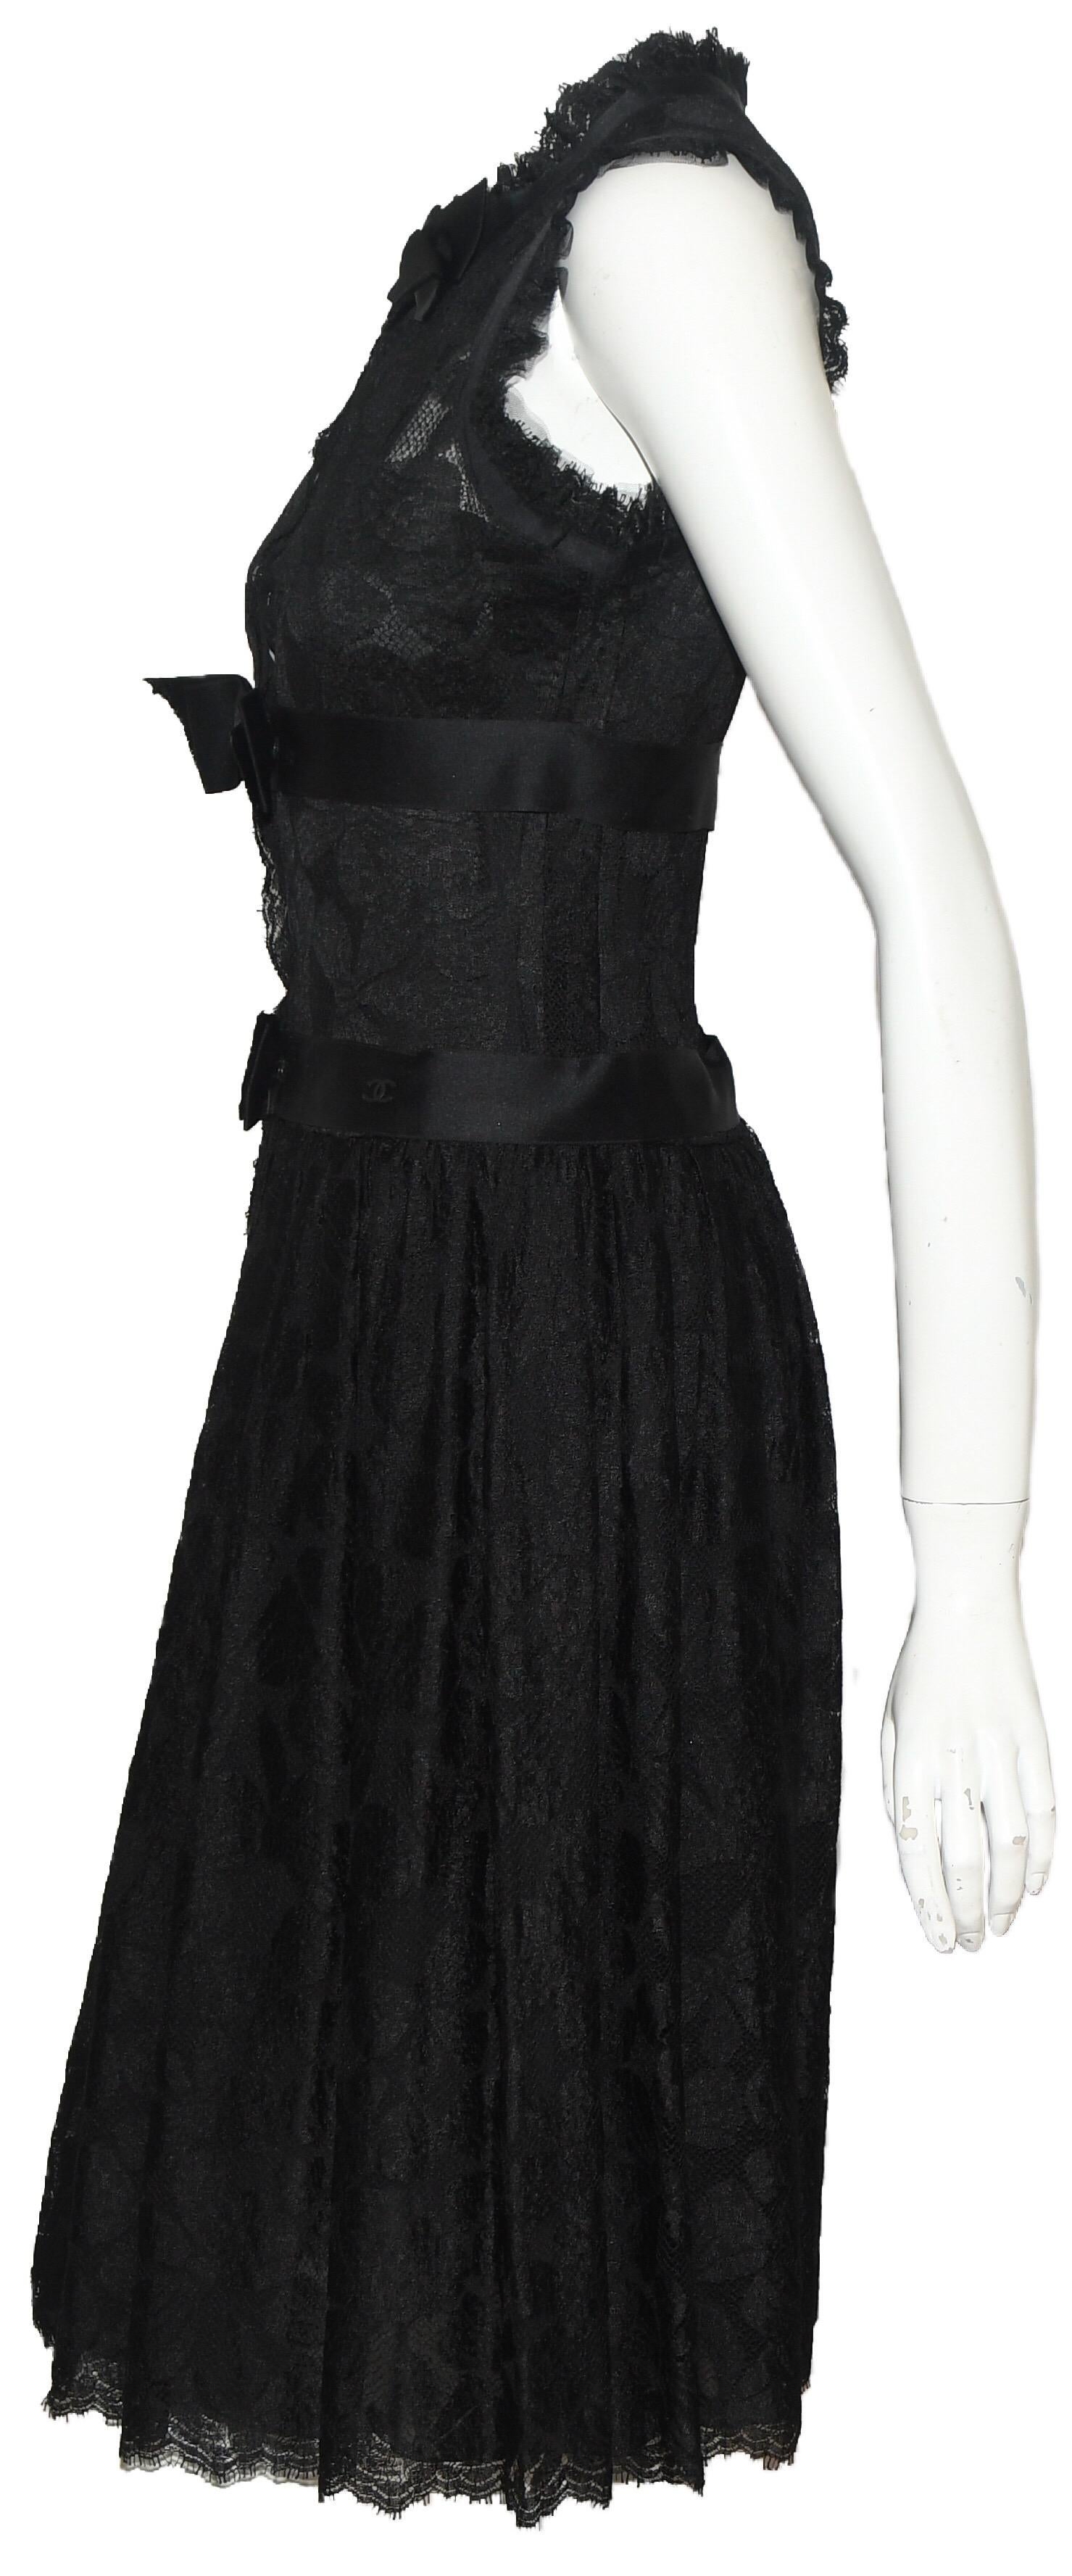 Women's Chanel Black Lace Evening Dress 2005 Fall Season With Button Down Front Closure 